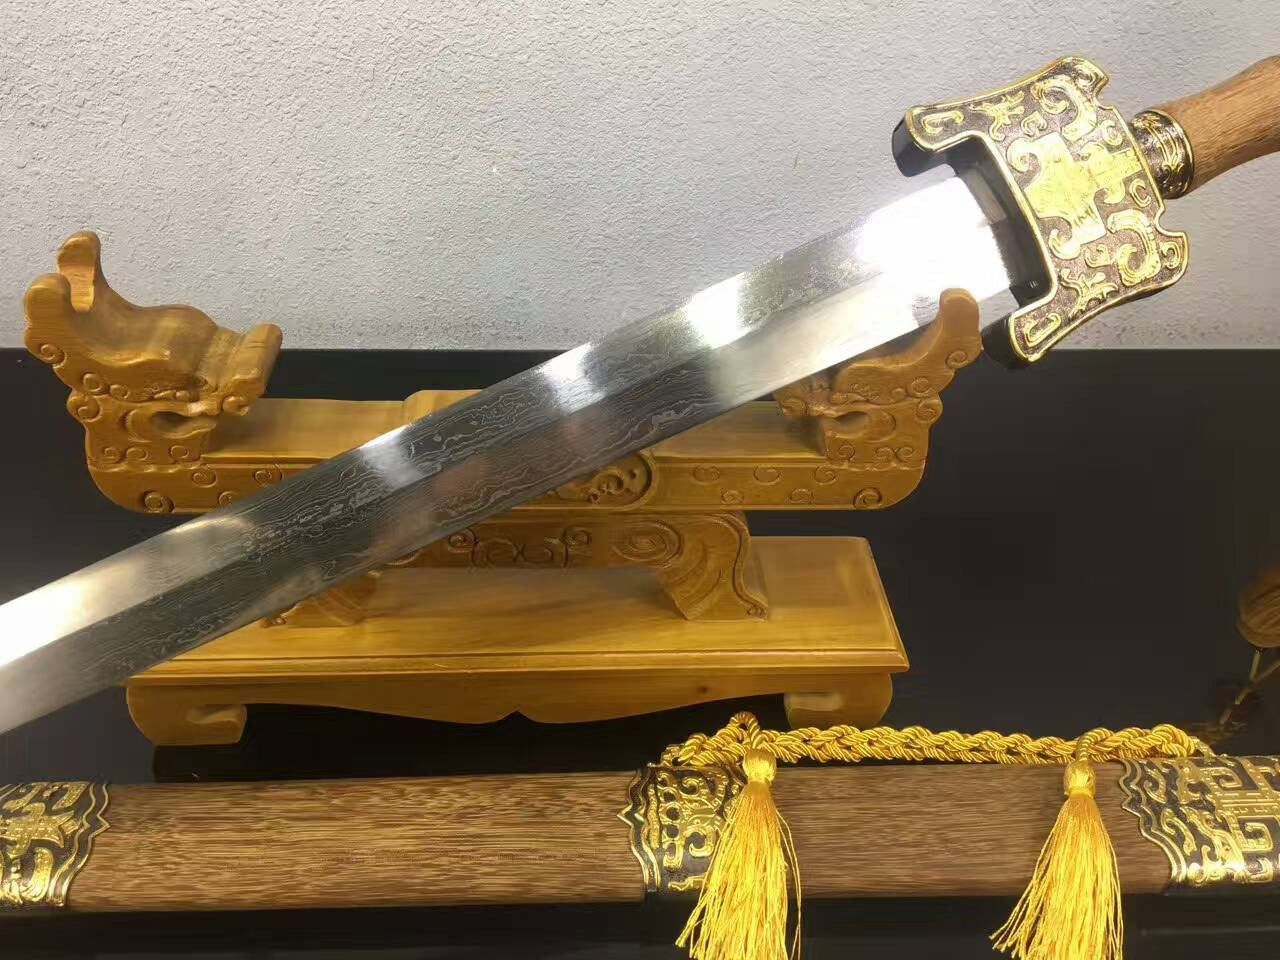 Heavenly Sword(Damascus steel,Rosewood scabbard,Alloy)Length 43" - Chinese sword shop